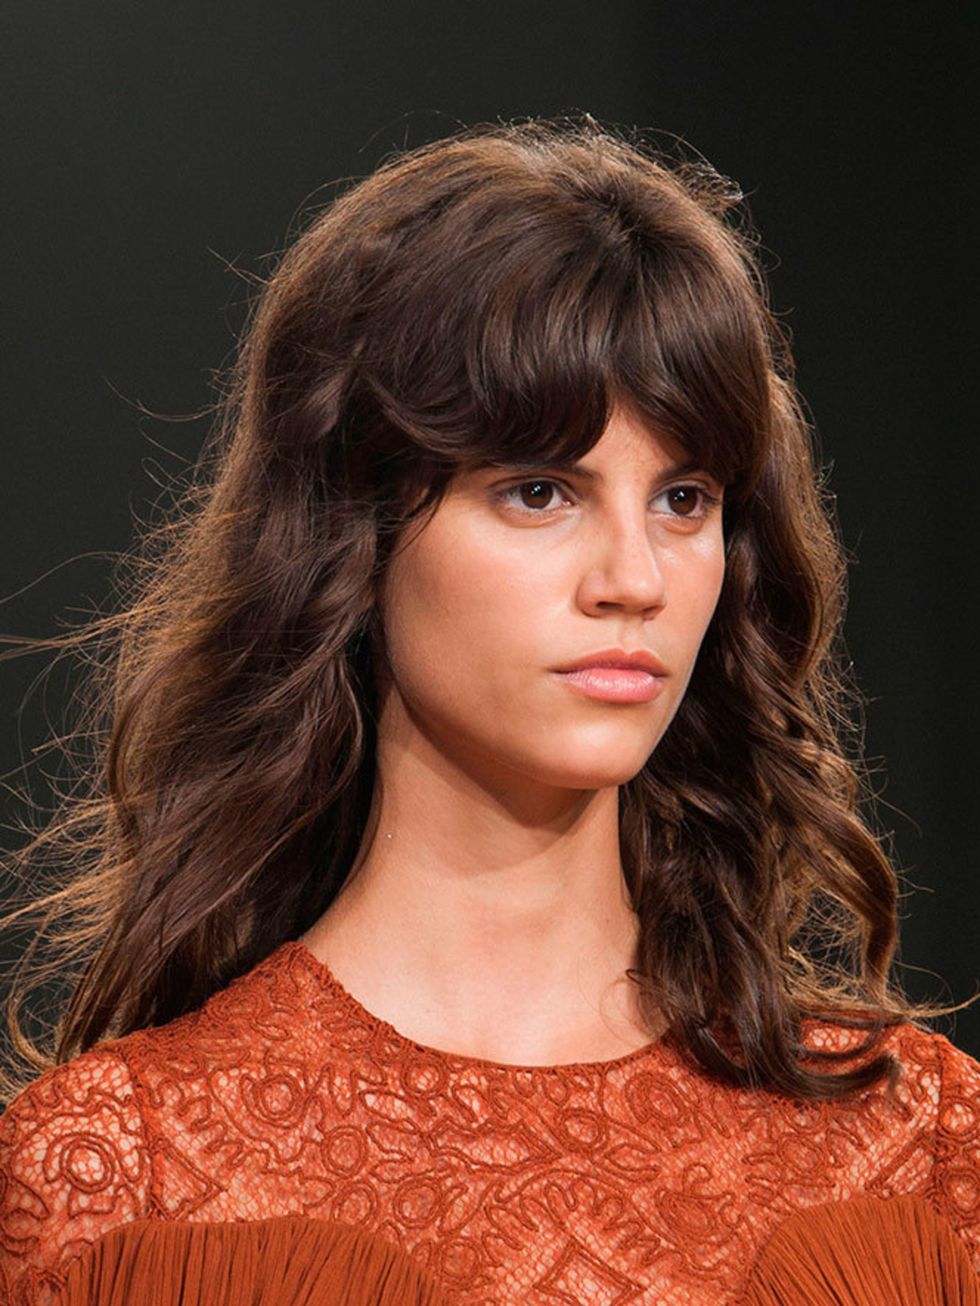 <p><a href="http://www.elleuk.com/catwalk/chloe/spring-summer-2015">Chloé</a></p>

<p>The look: Chocolate lashes</p>

<p>Make-up artist: Lucia Pieroni</p>

<p>Key products: <a href="http://www.maccosmetics.co.uk/product/160/21871/Products/Face/Primer/Prep